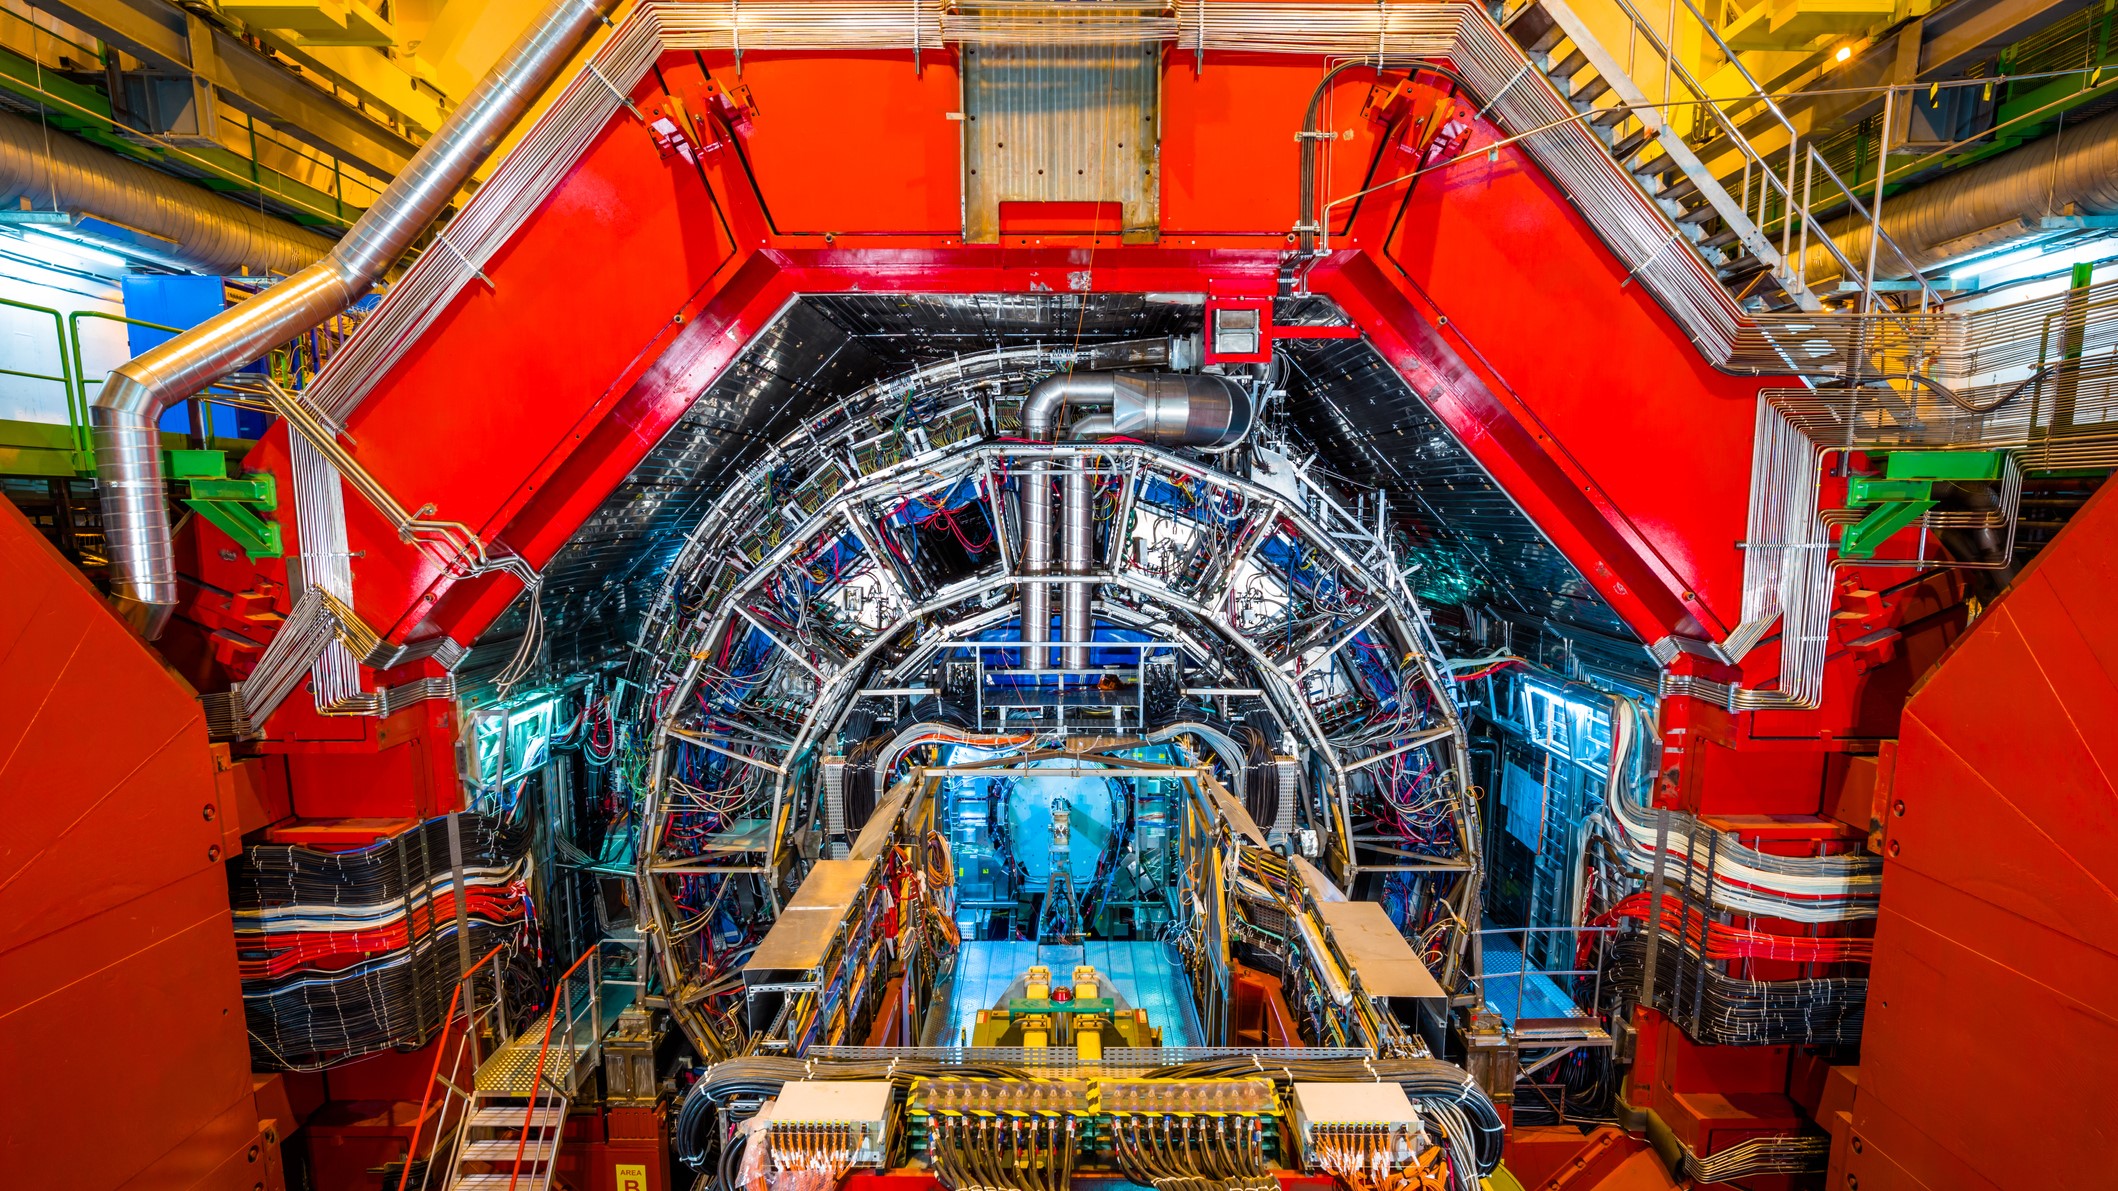 The ATLAS detector (A Toroidal LHC Apparatus) is one of the LHC’s general-purpose detectors.